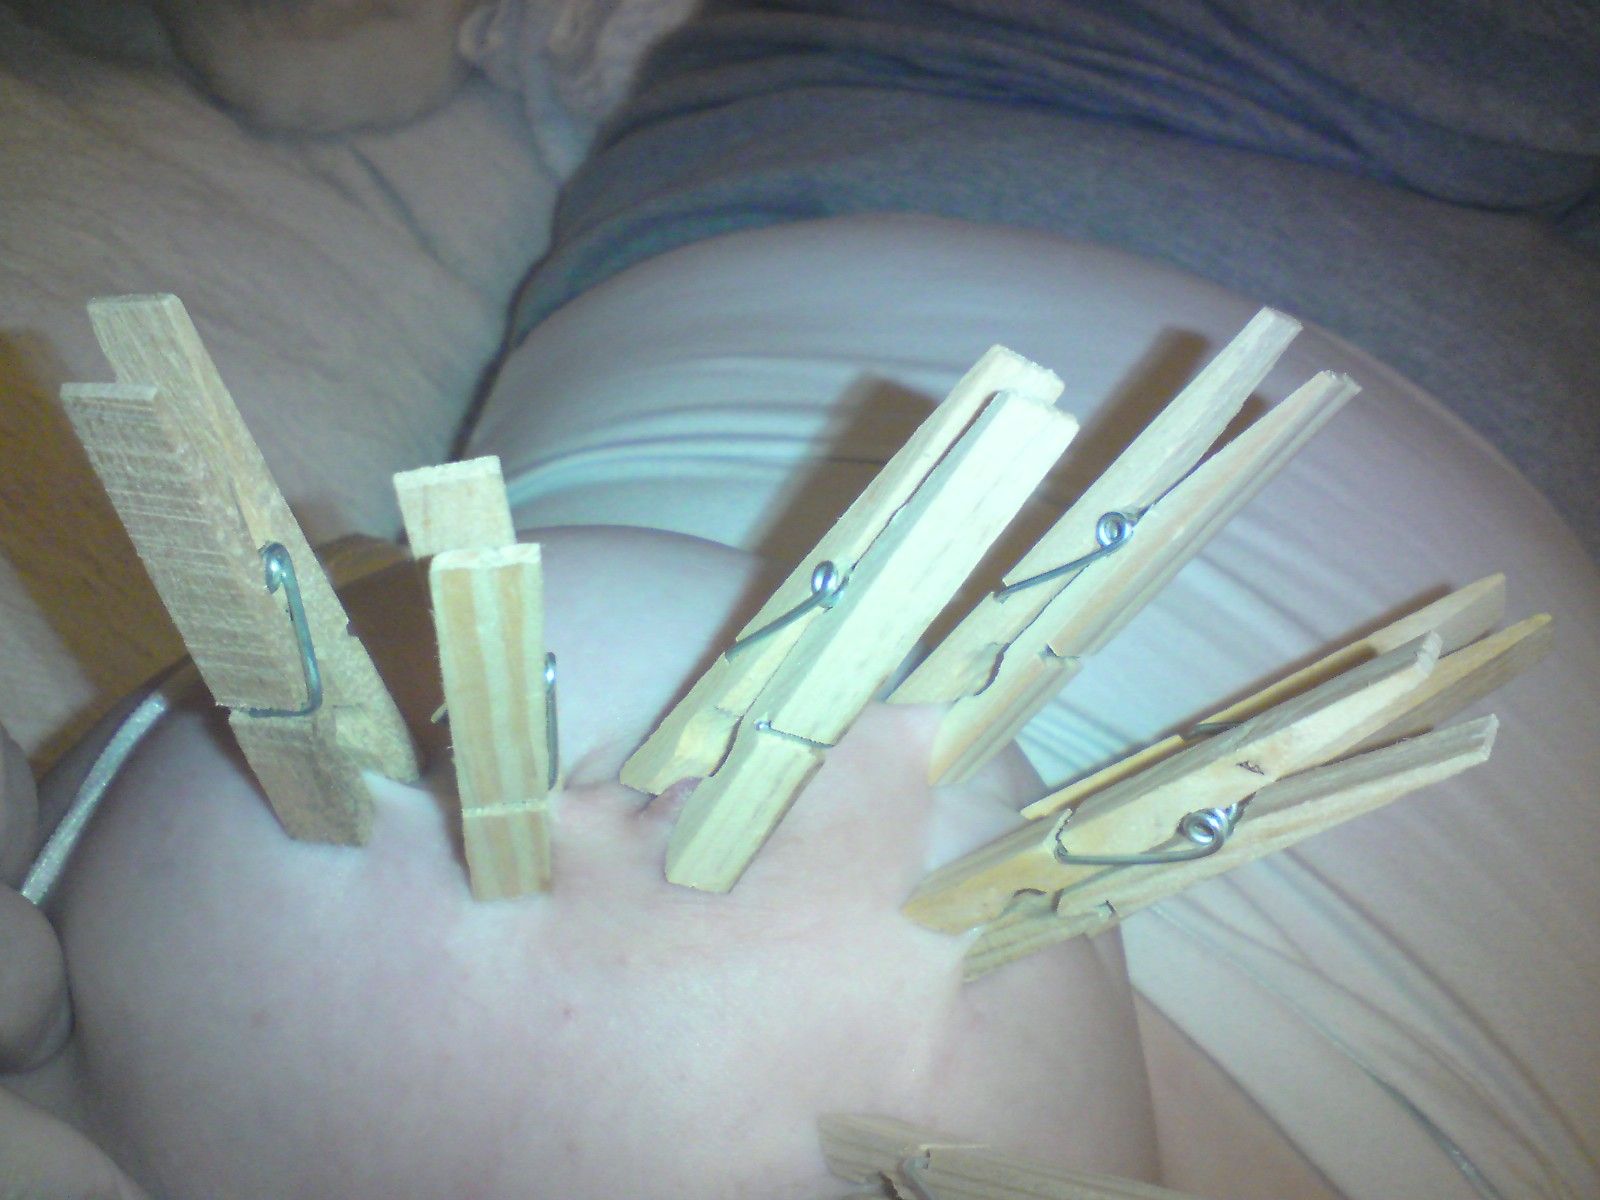 more pegs